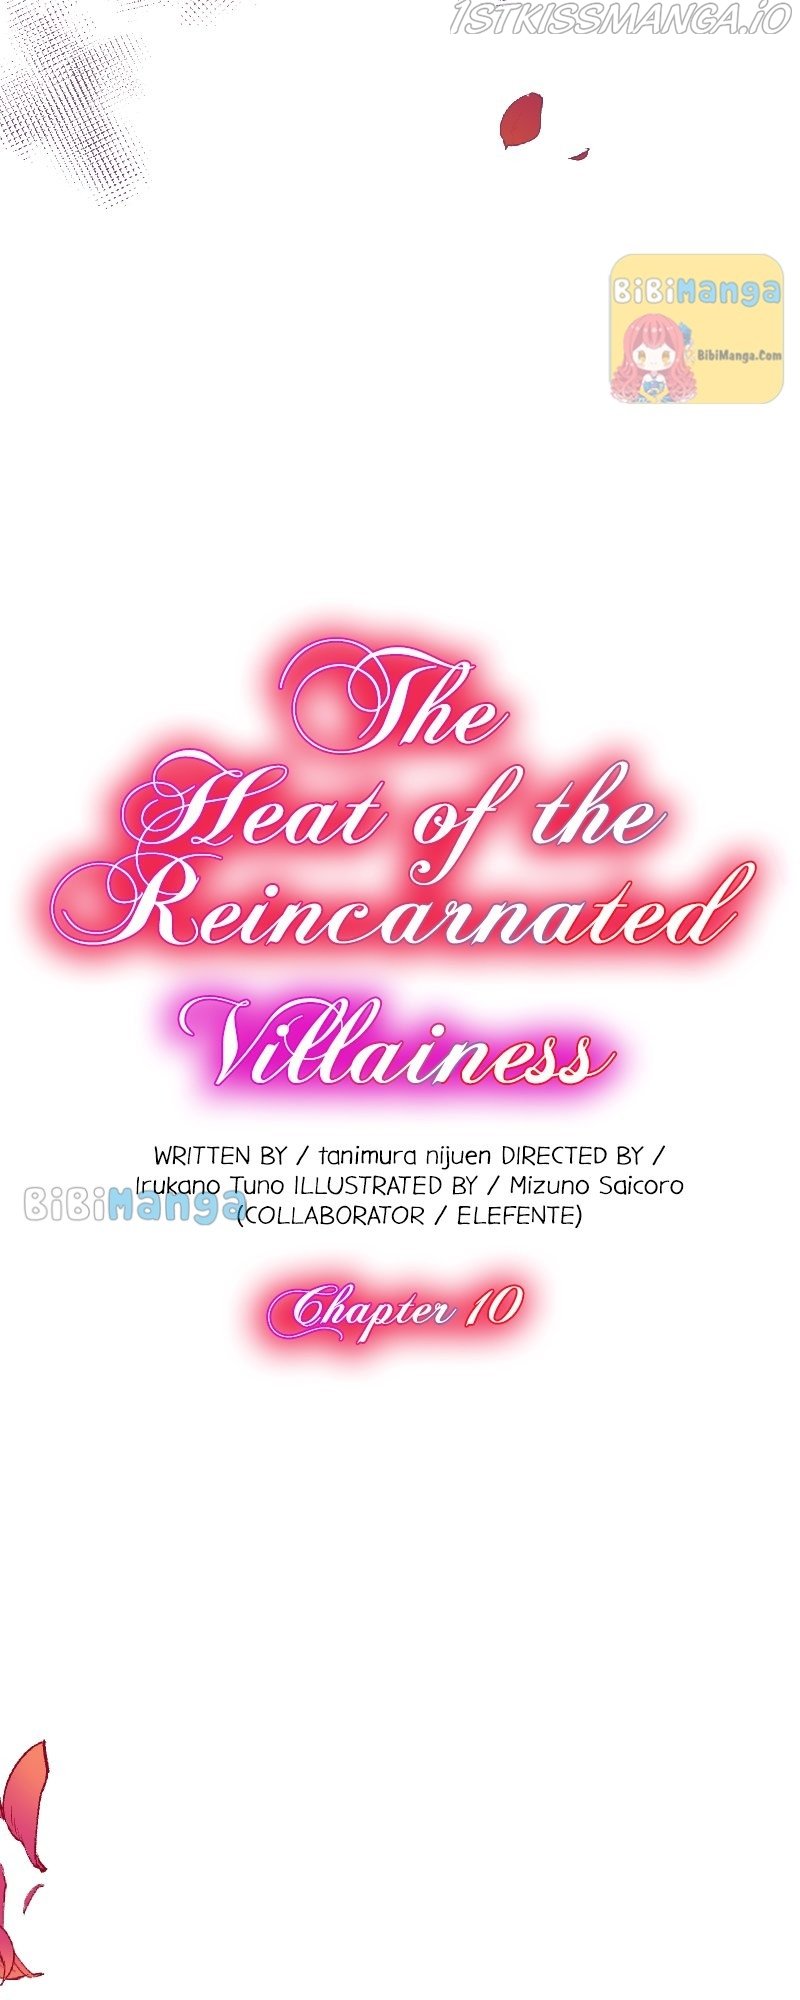 The Heat of the Reincarnated Villainess chapter 10